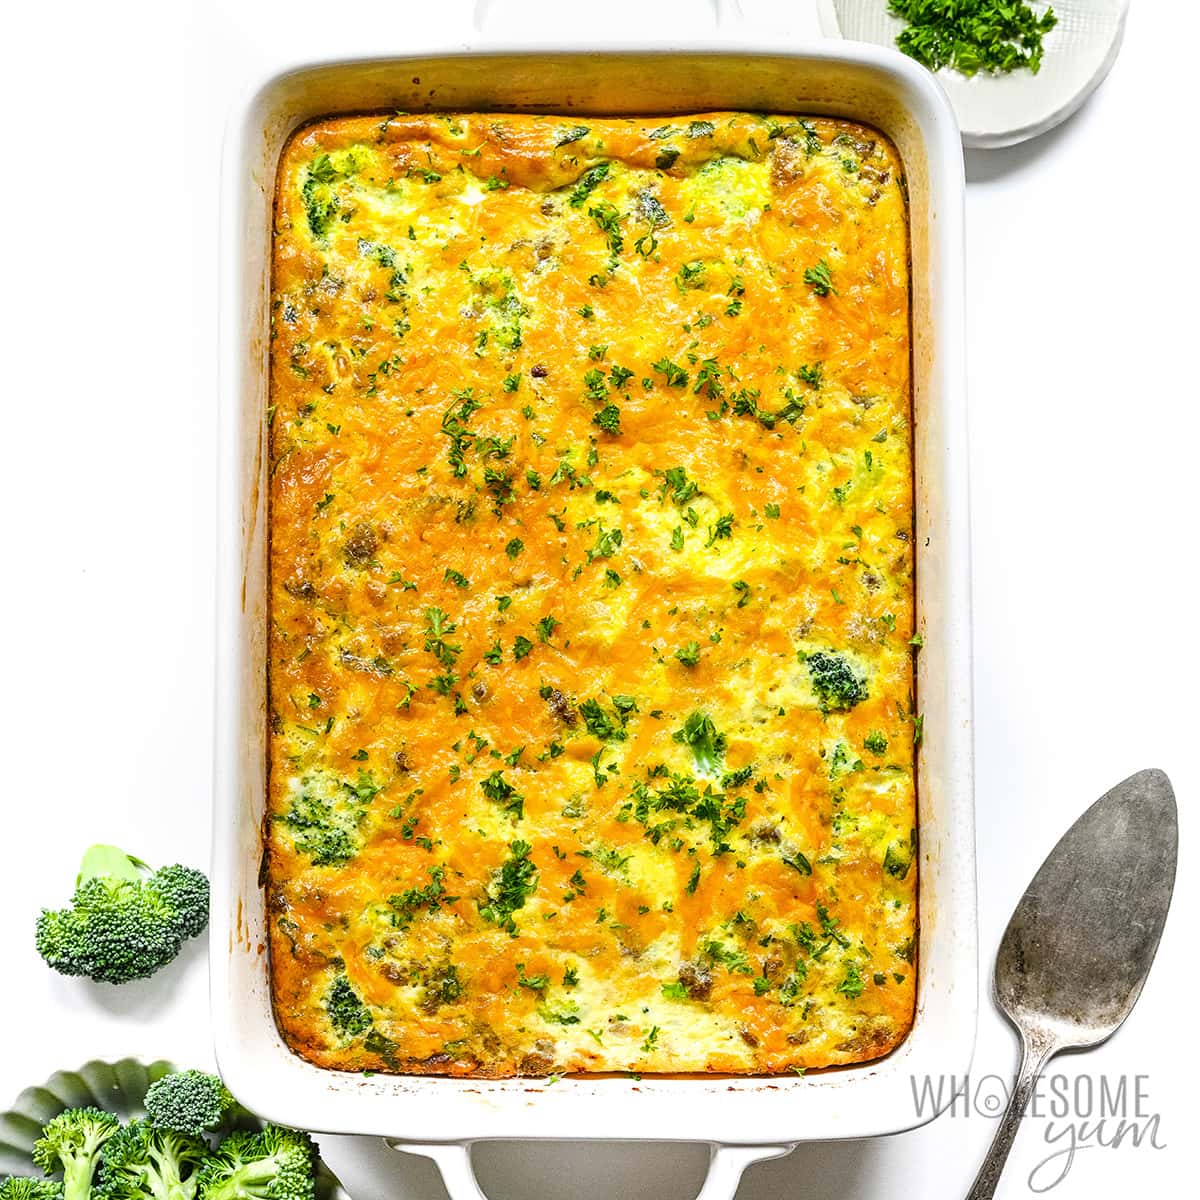 Sausage, egg and cheese casserole in baking dish.